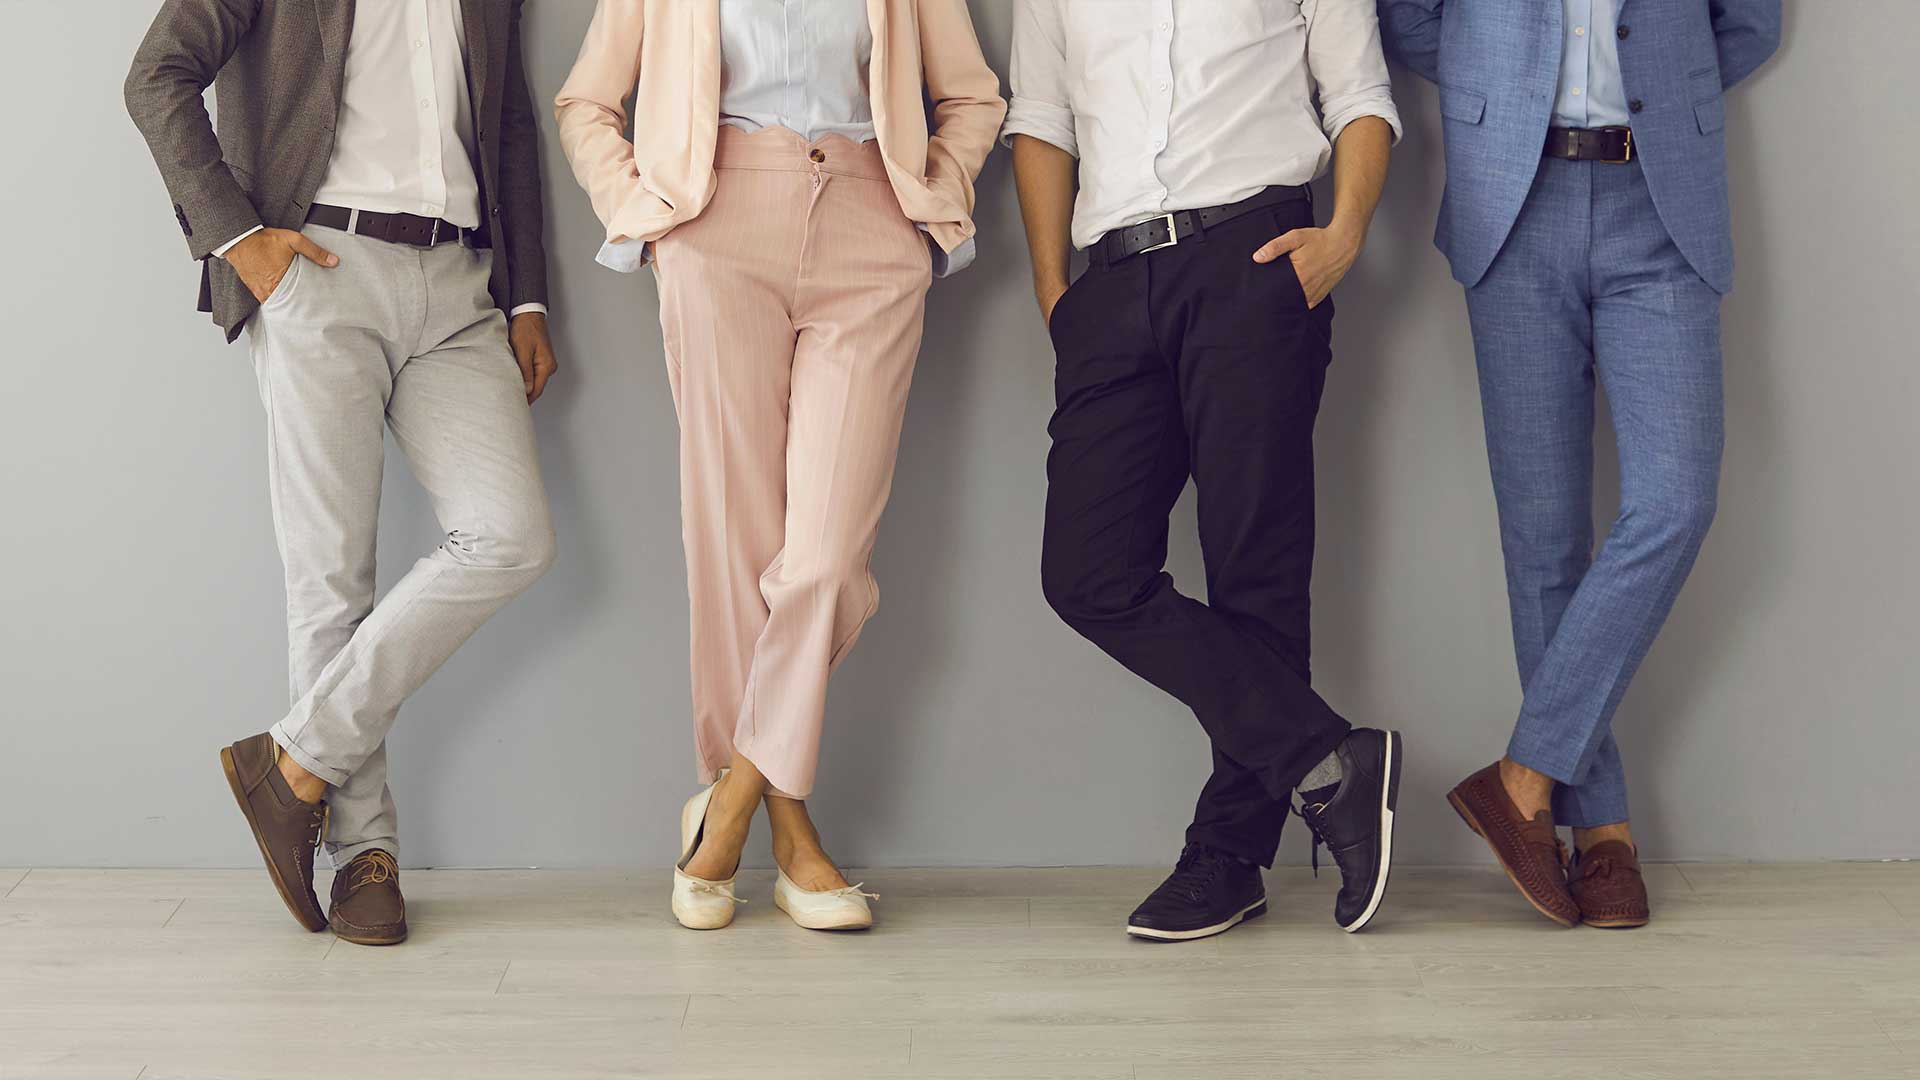 3 Key Points to keep in mind while selecting the right pants.